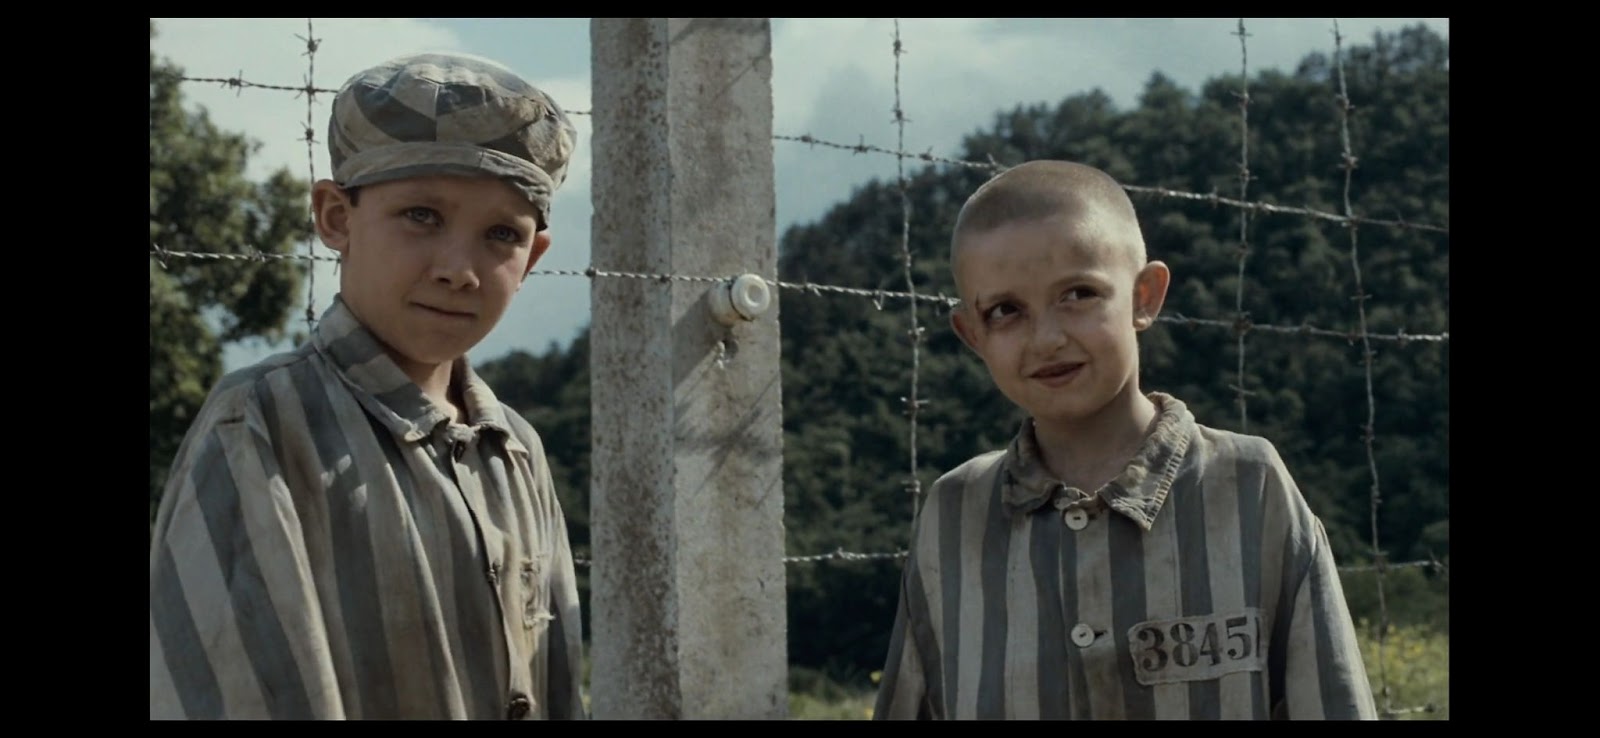 movie review on the boy in the striped pajamas